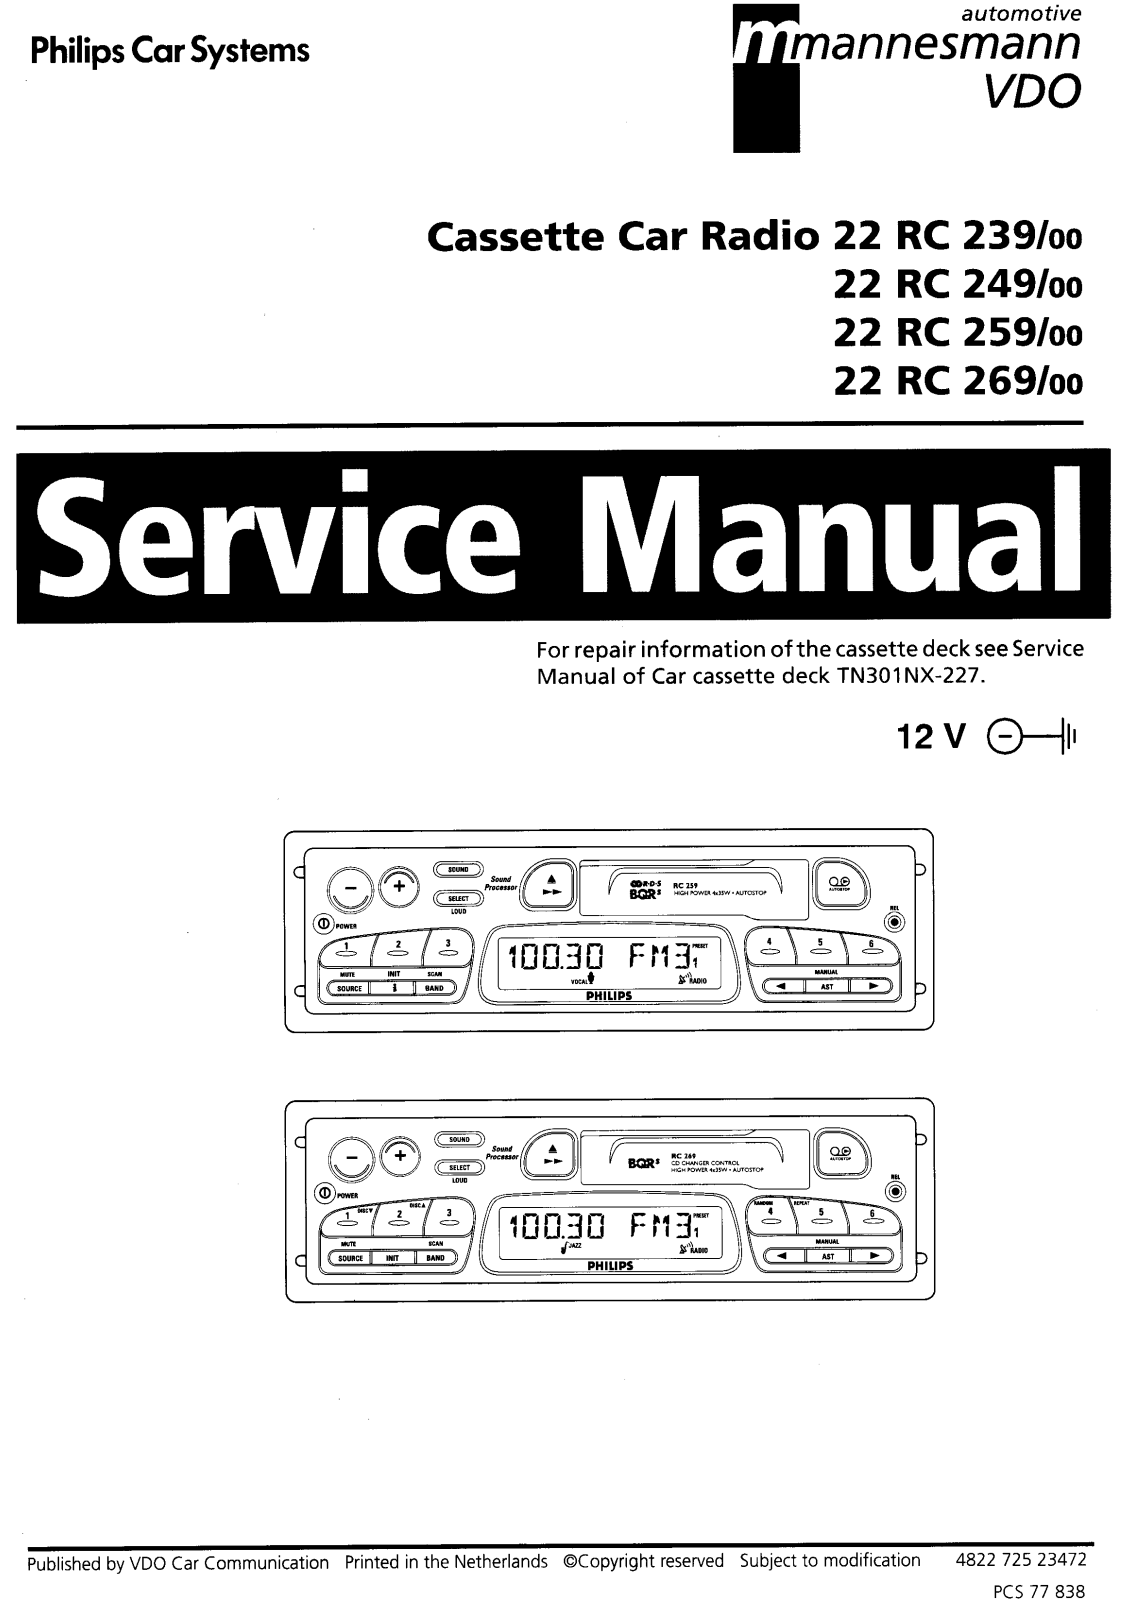 Philips RC-239, RC-249, RC-259, RC-269 Service manual